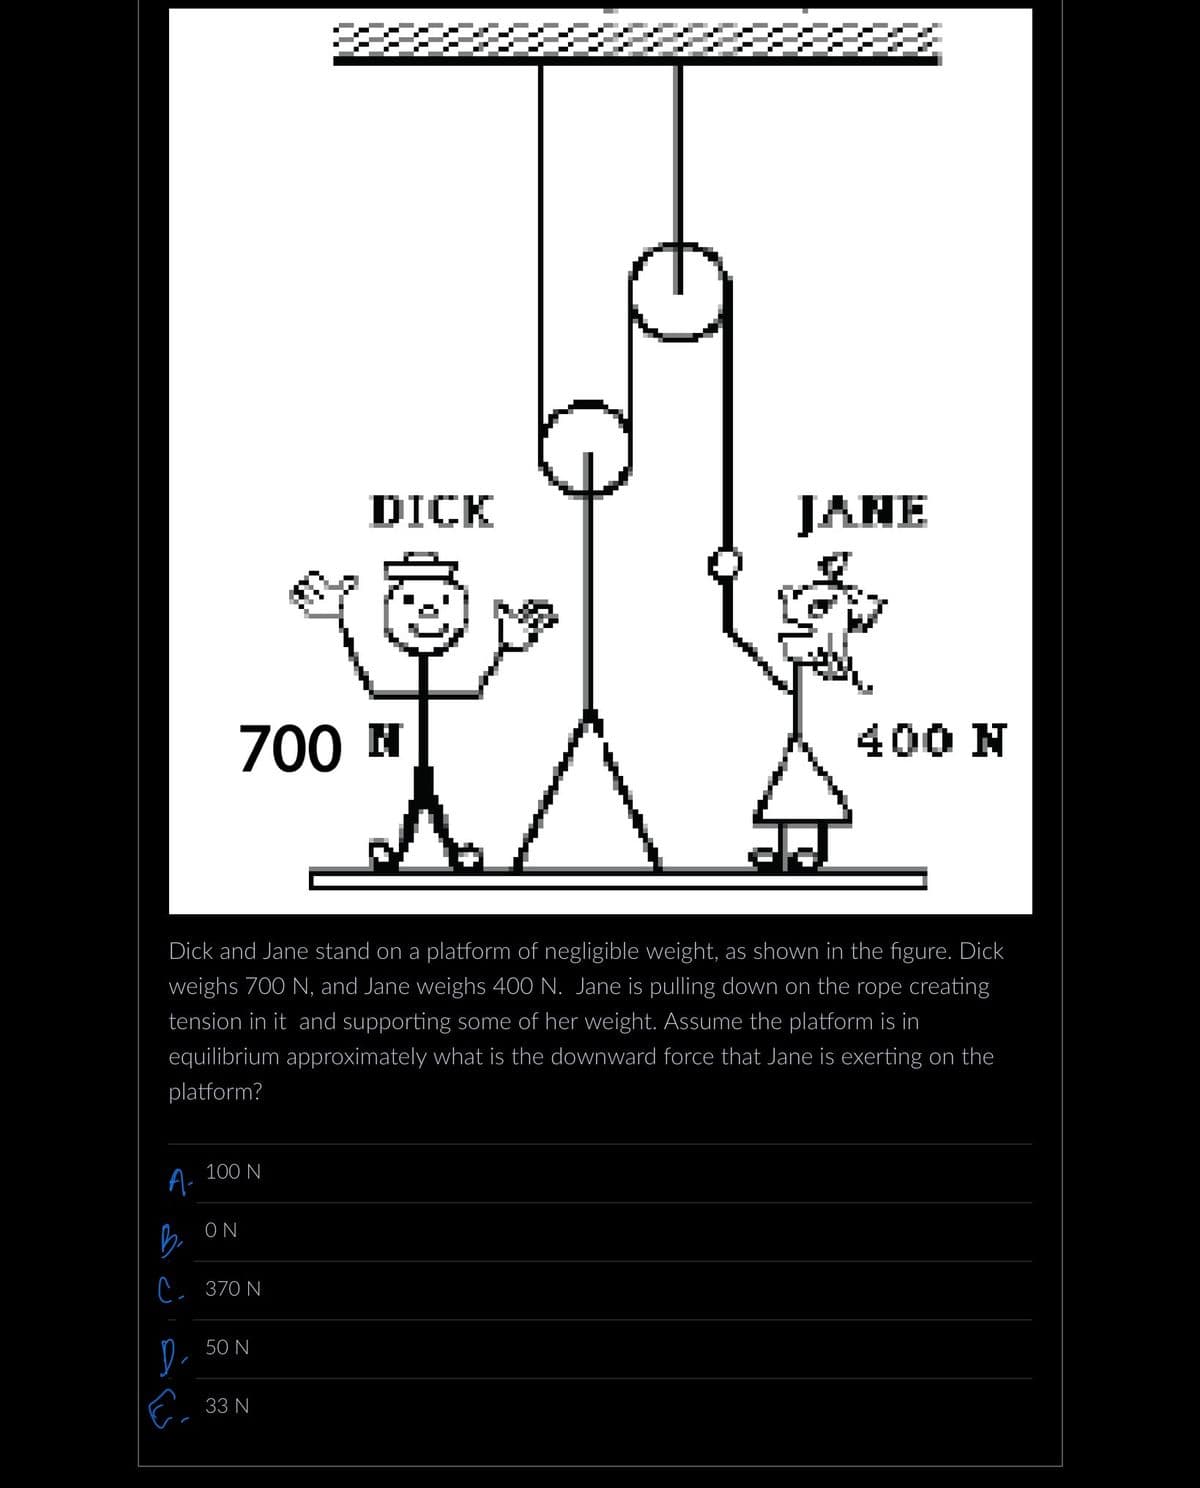 A.
700 N
100 N
Dick and Jane stand on a platform of negligible weight, as shown in the figure. Dick
weighs 700 N, and Jane weighs 400 N. Jane is pulling down on the rope creating
tension in it and supporting some of her weight. Assume the platform is in
_equilibrium approximately what is the downward force that Jane is exerting on the
platform?
ON
B.
C 370 N
D.
E.
50 N
DICK
33 N
JANE
400 N